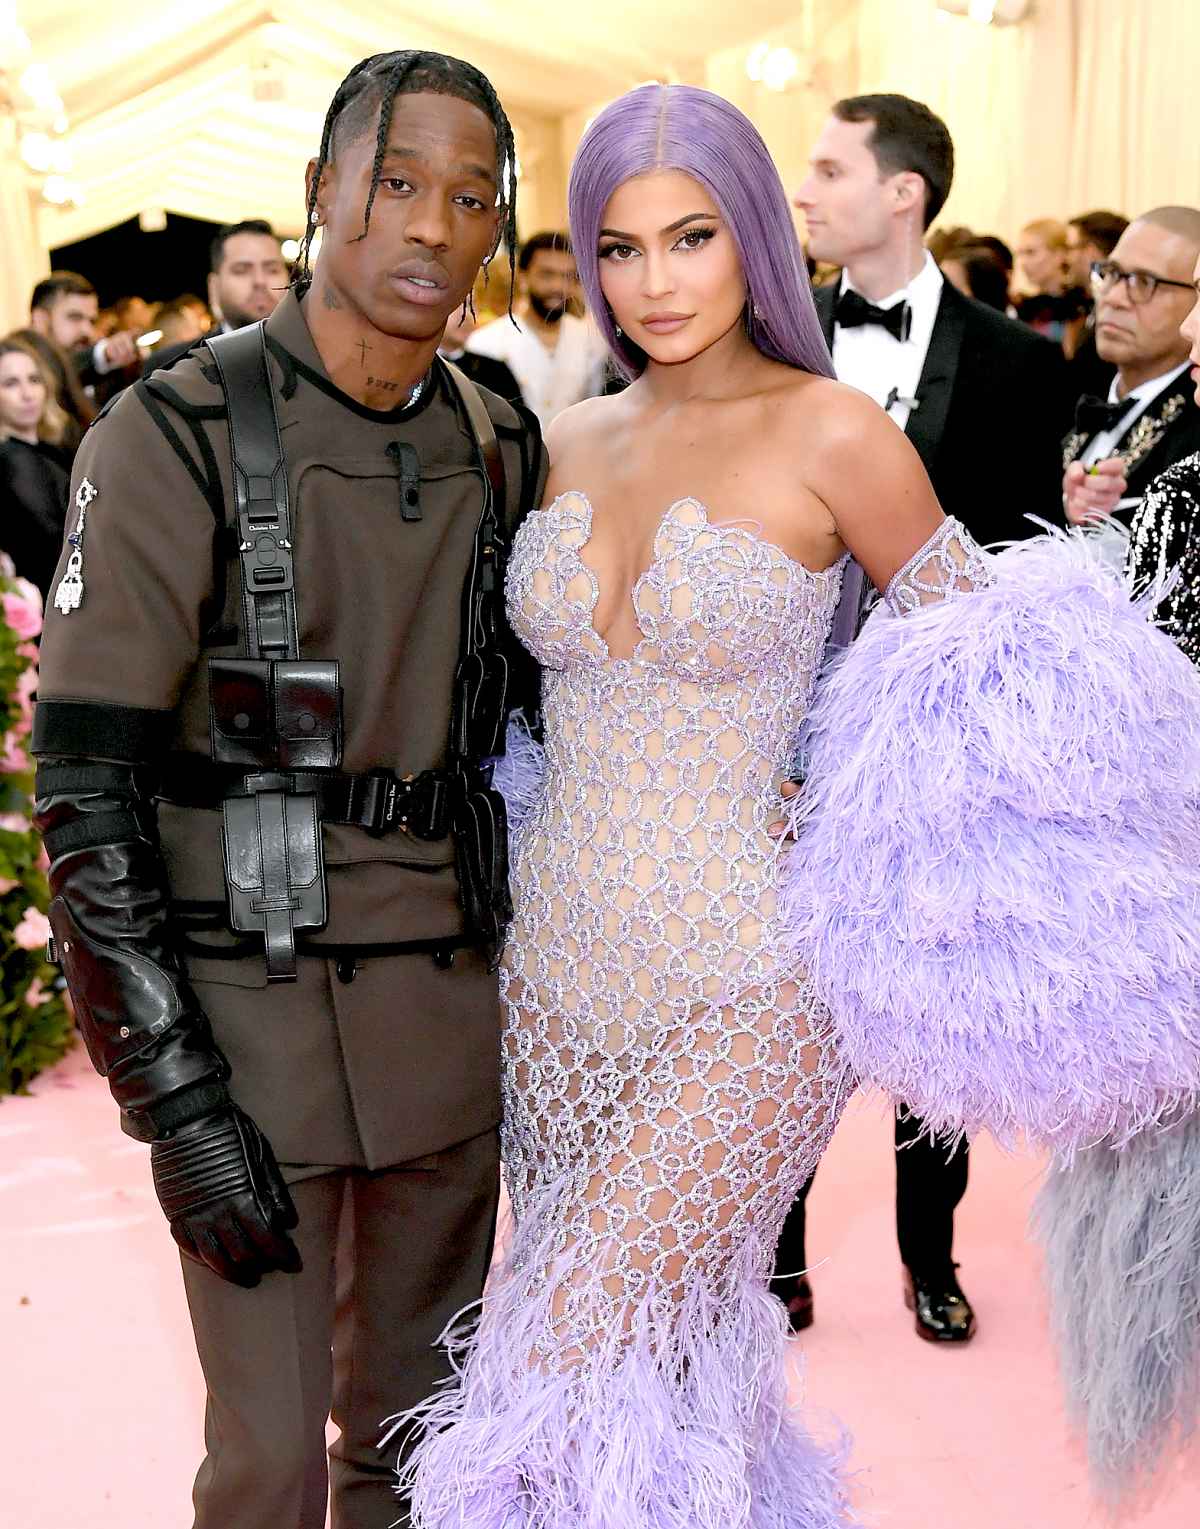 Kylie Jenner in purple gown at Met Gala 2019 ~ I want her style